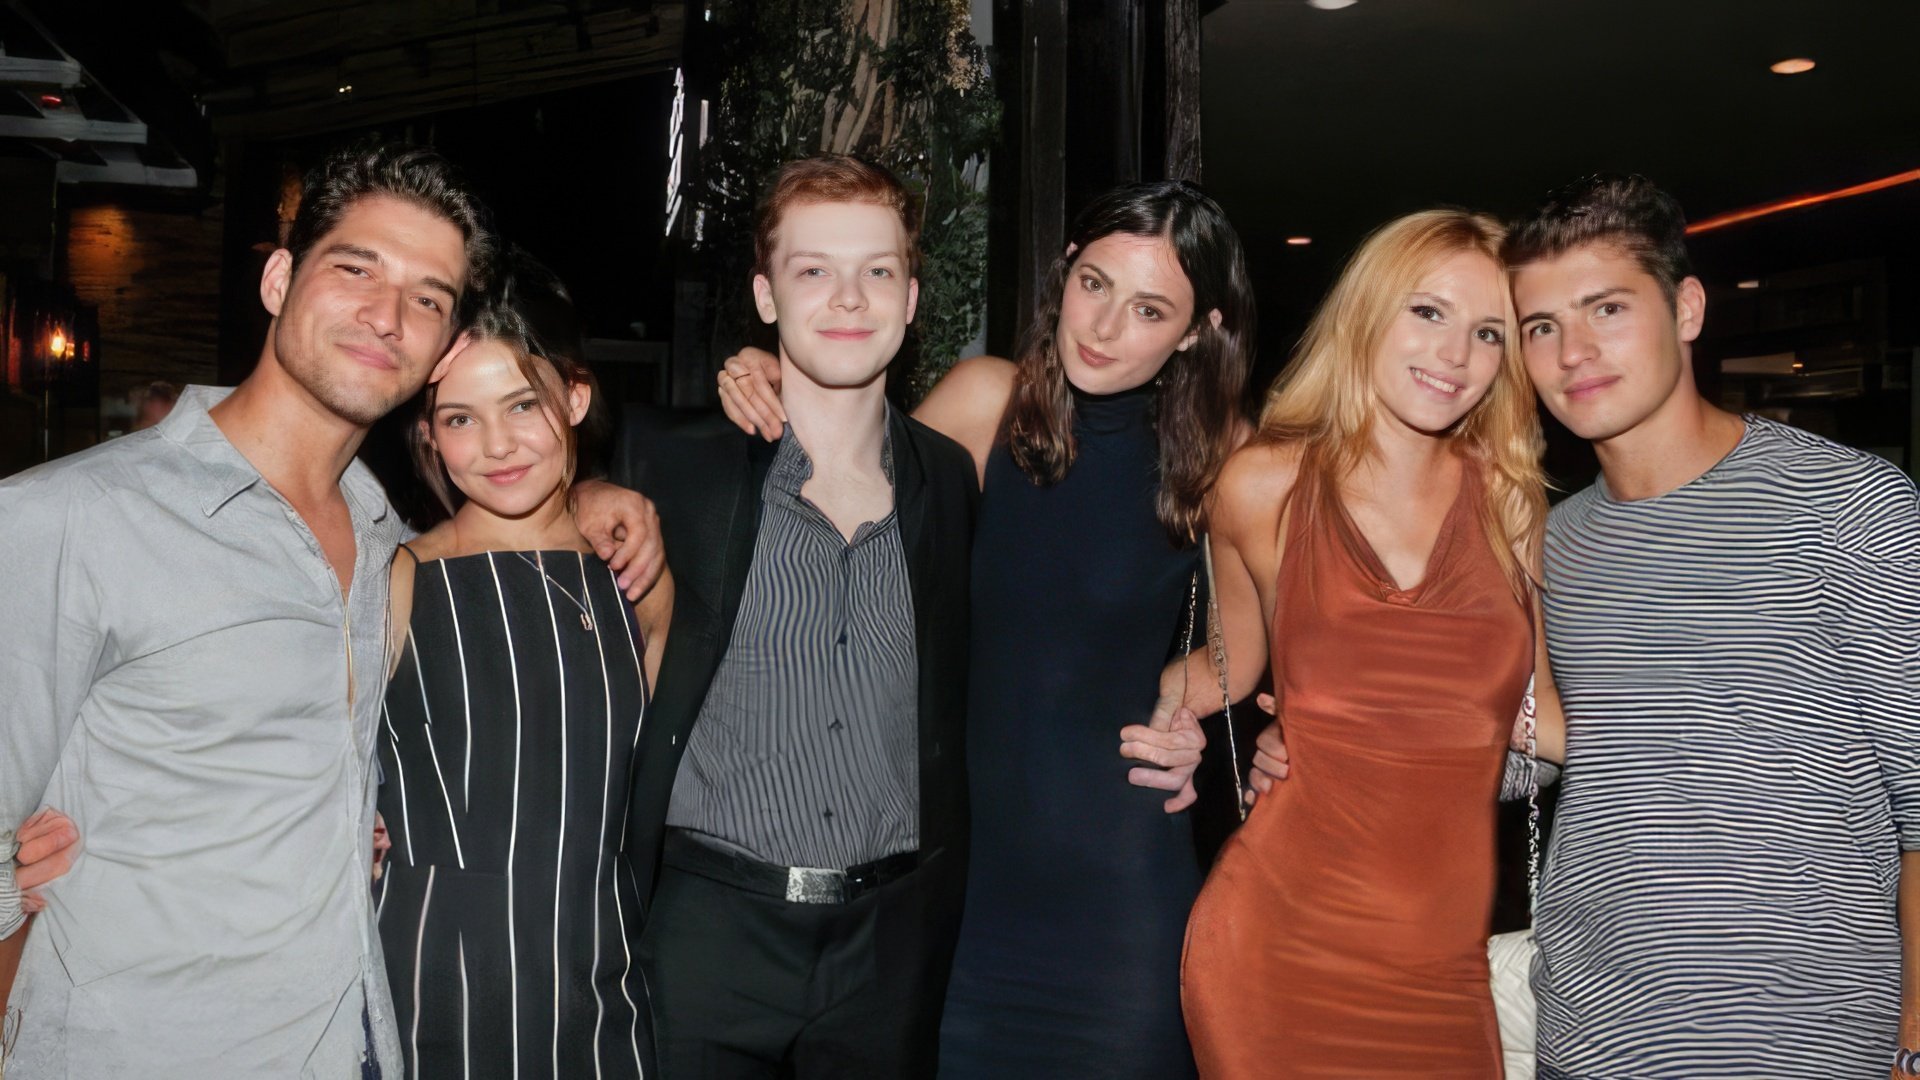 Cameron Monaghan and his ex-girlfriend Sadie Newman (center)